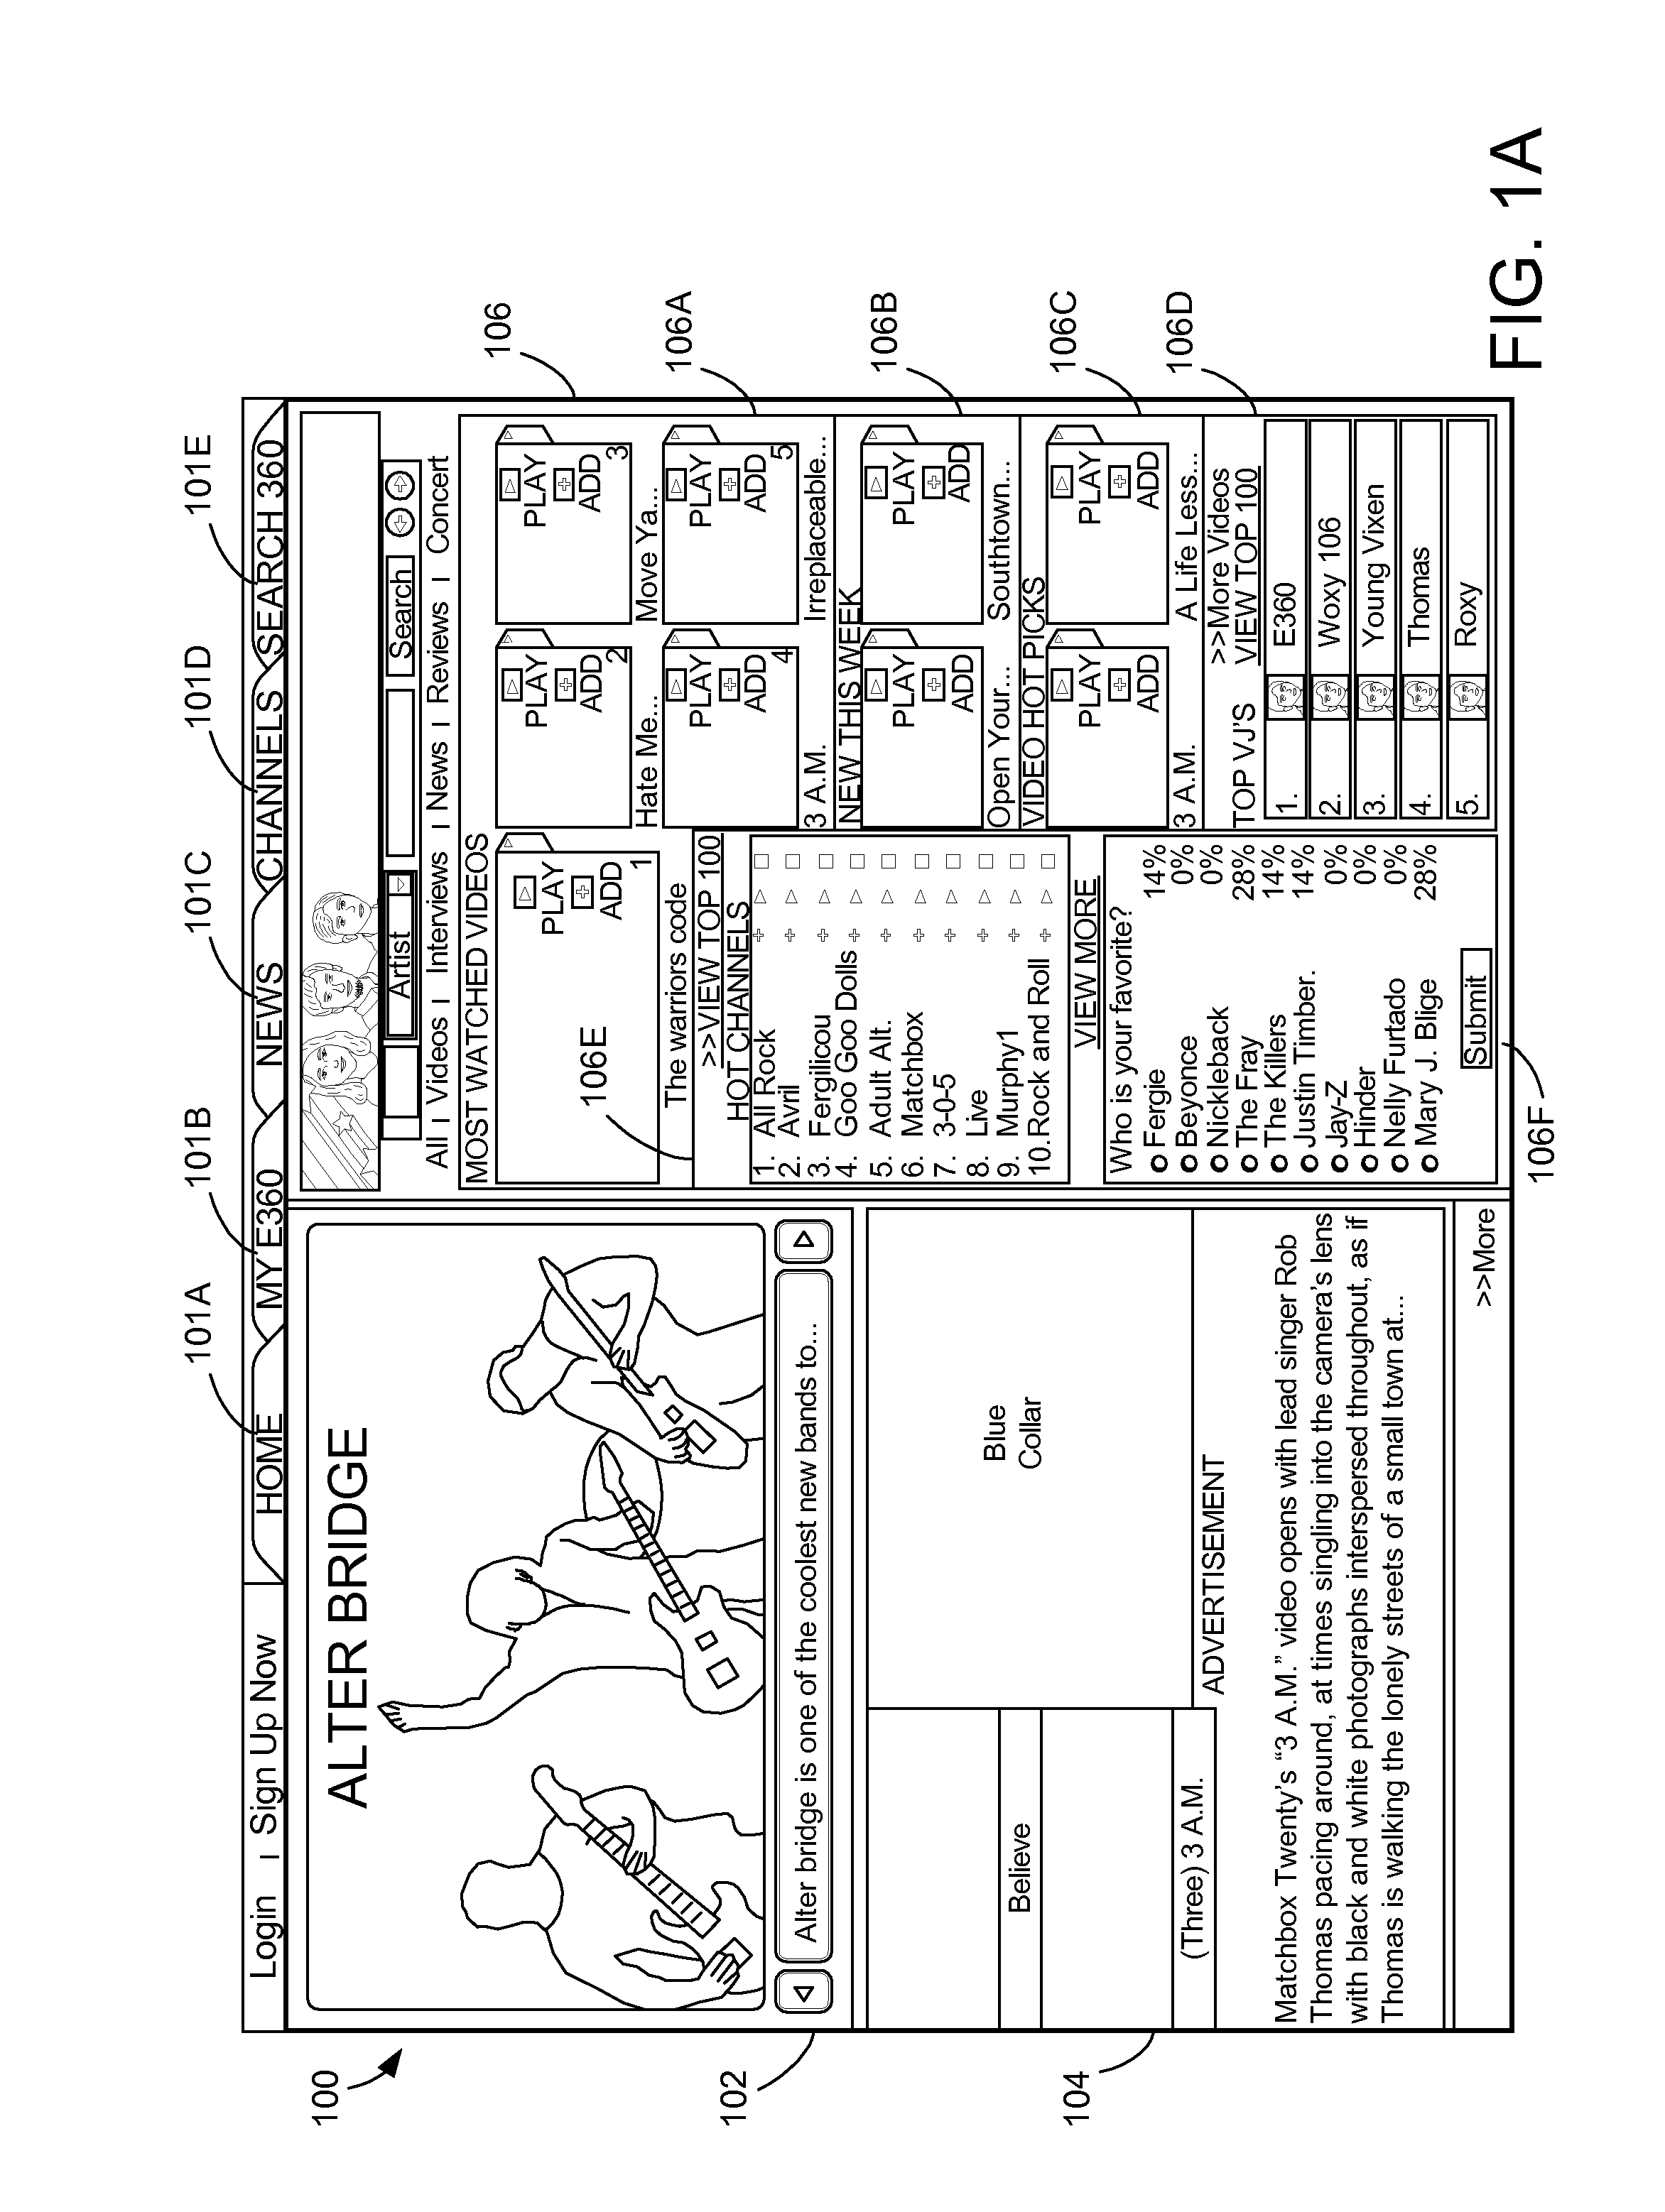 Method and apparatus for providing continuous playback of media programs at a remote end user computer